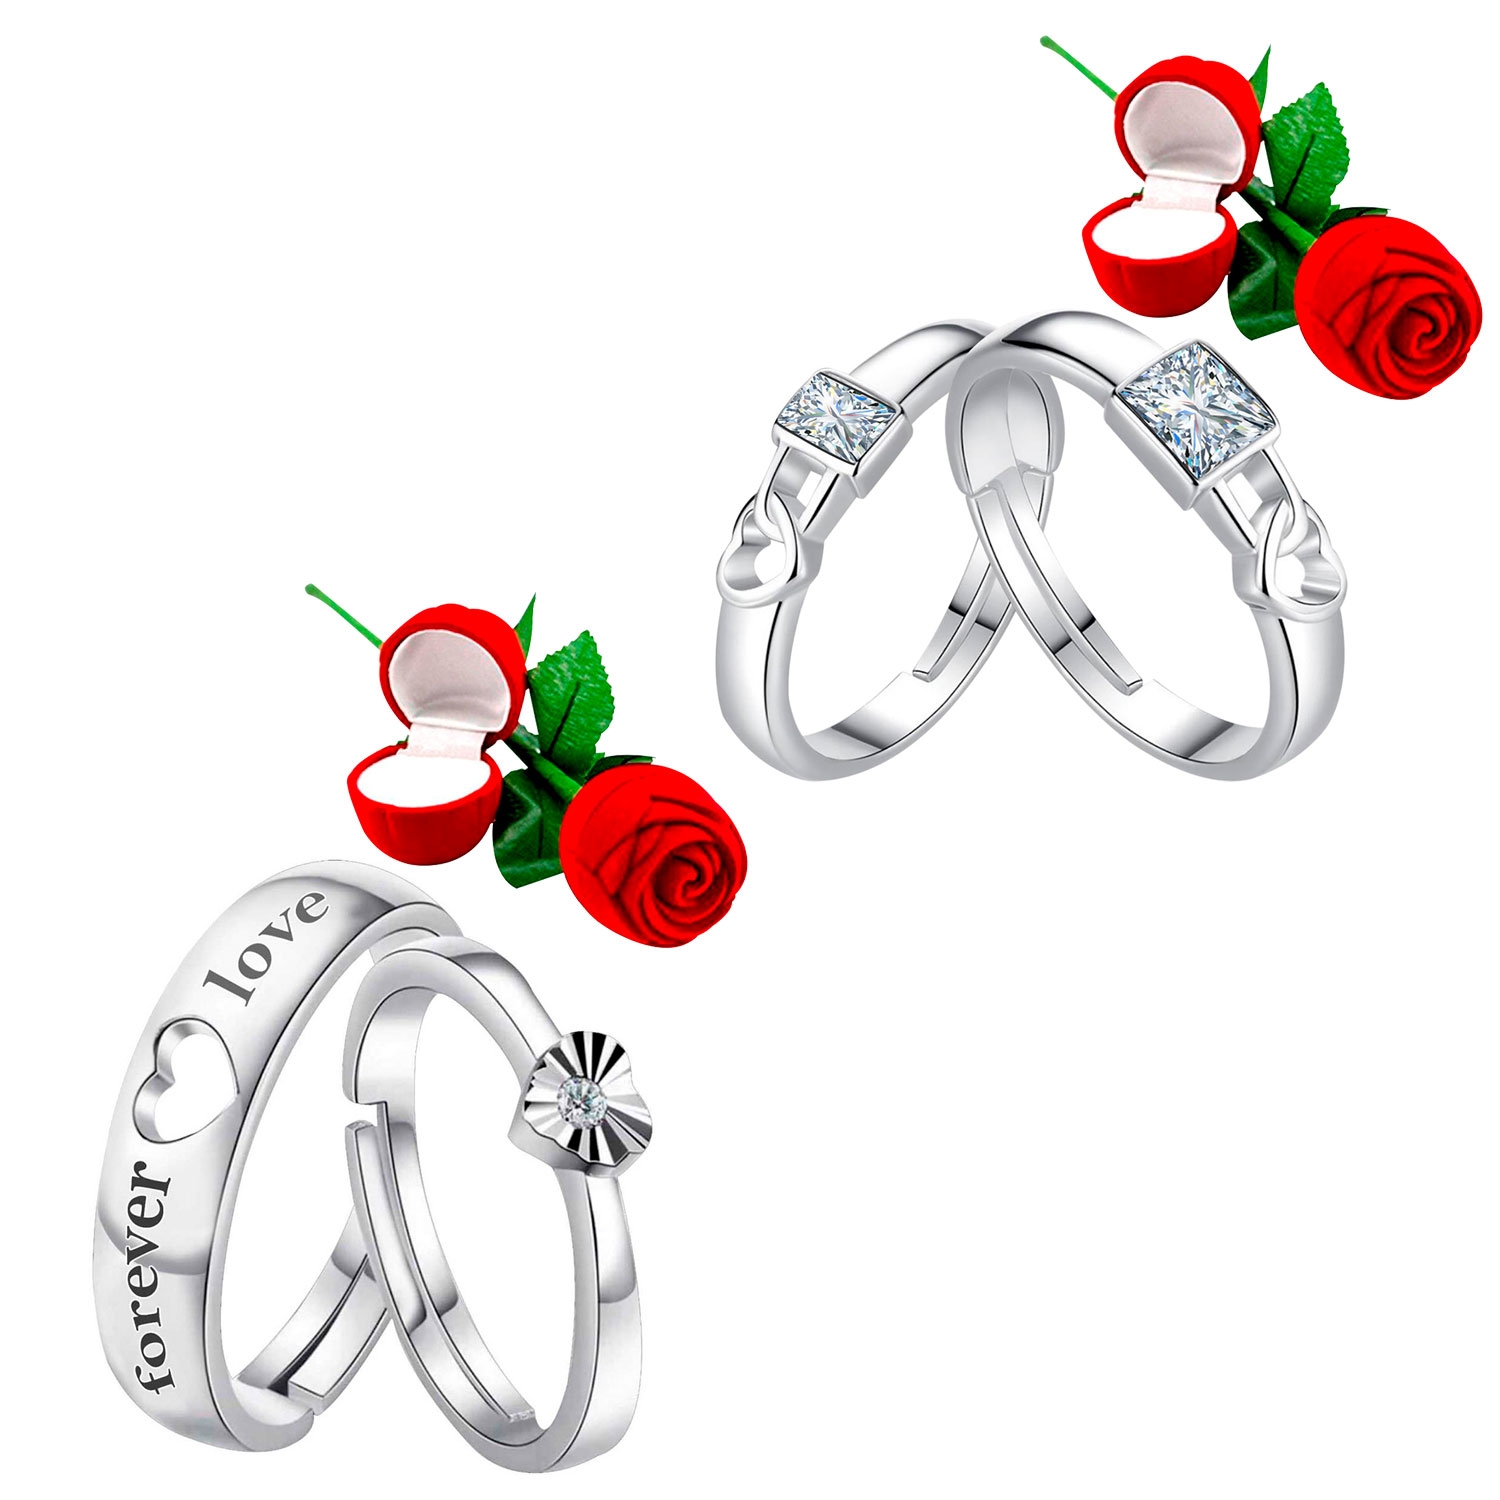 SILVER SHINE |  Designer Adjustable Couple Rings Set for lovers with 2 Piece Red Rose Gift Box Silver Plated Ring for Men and Women 